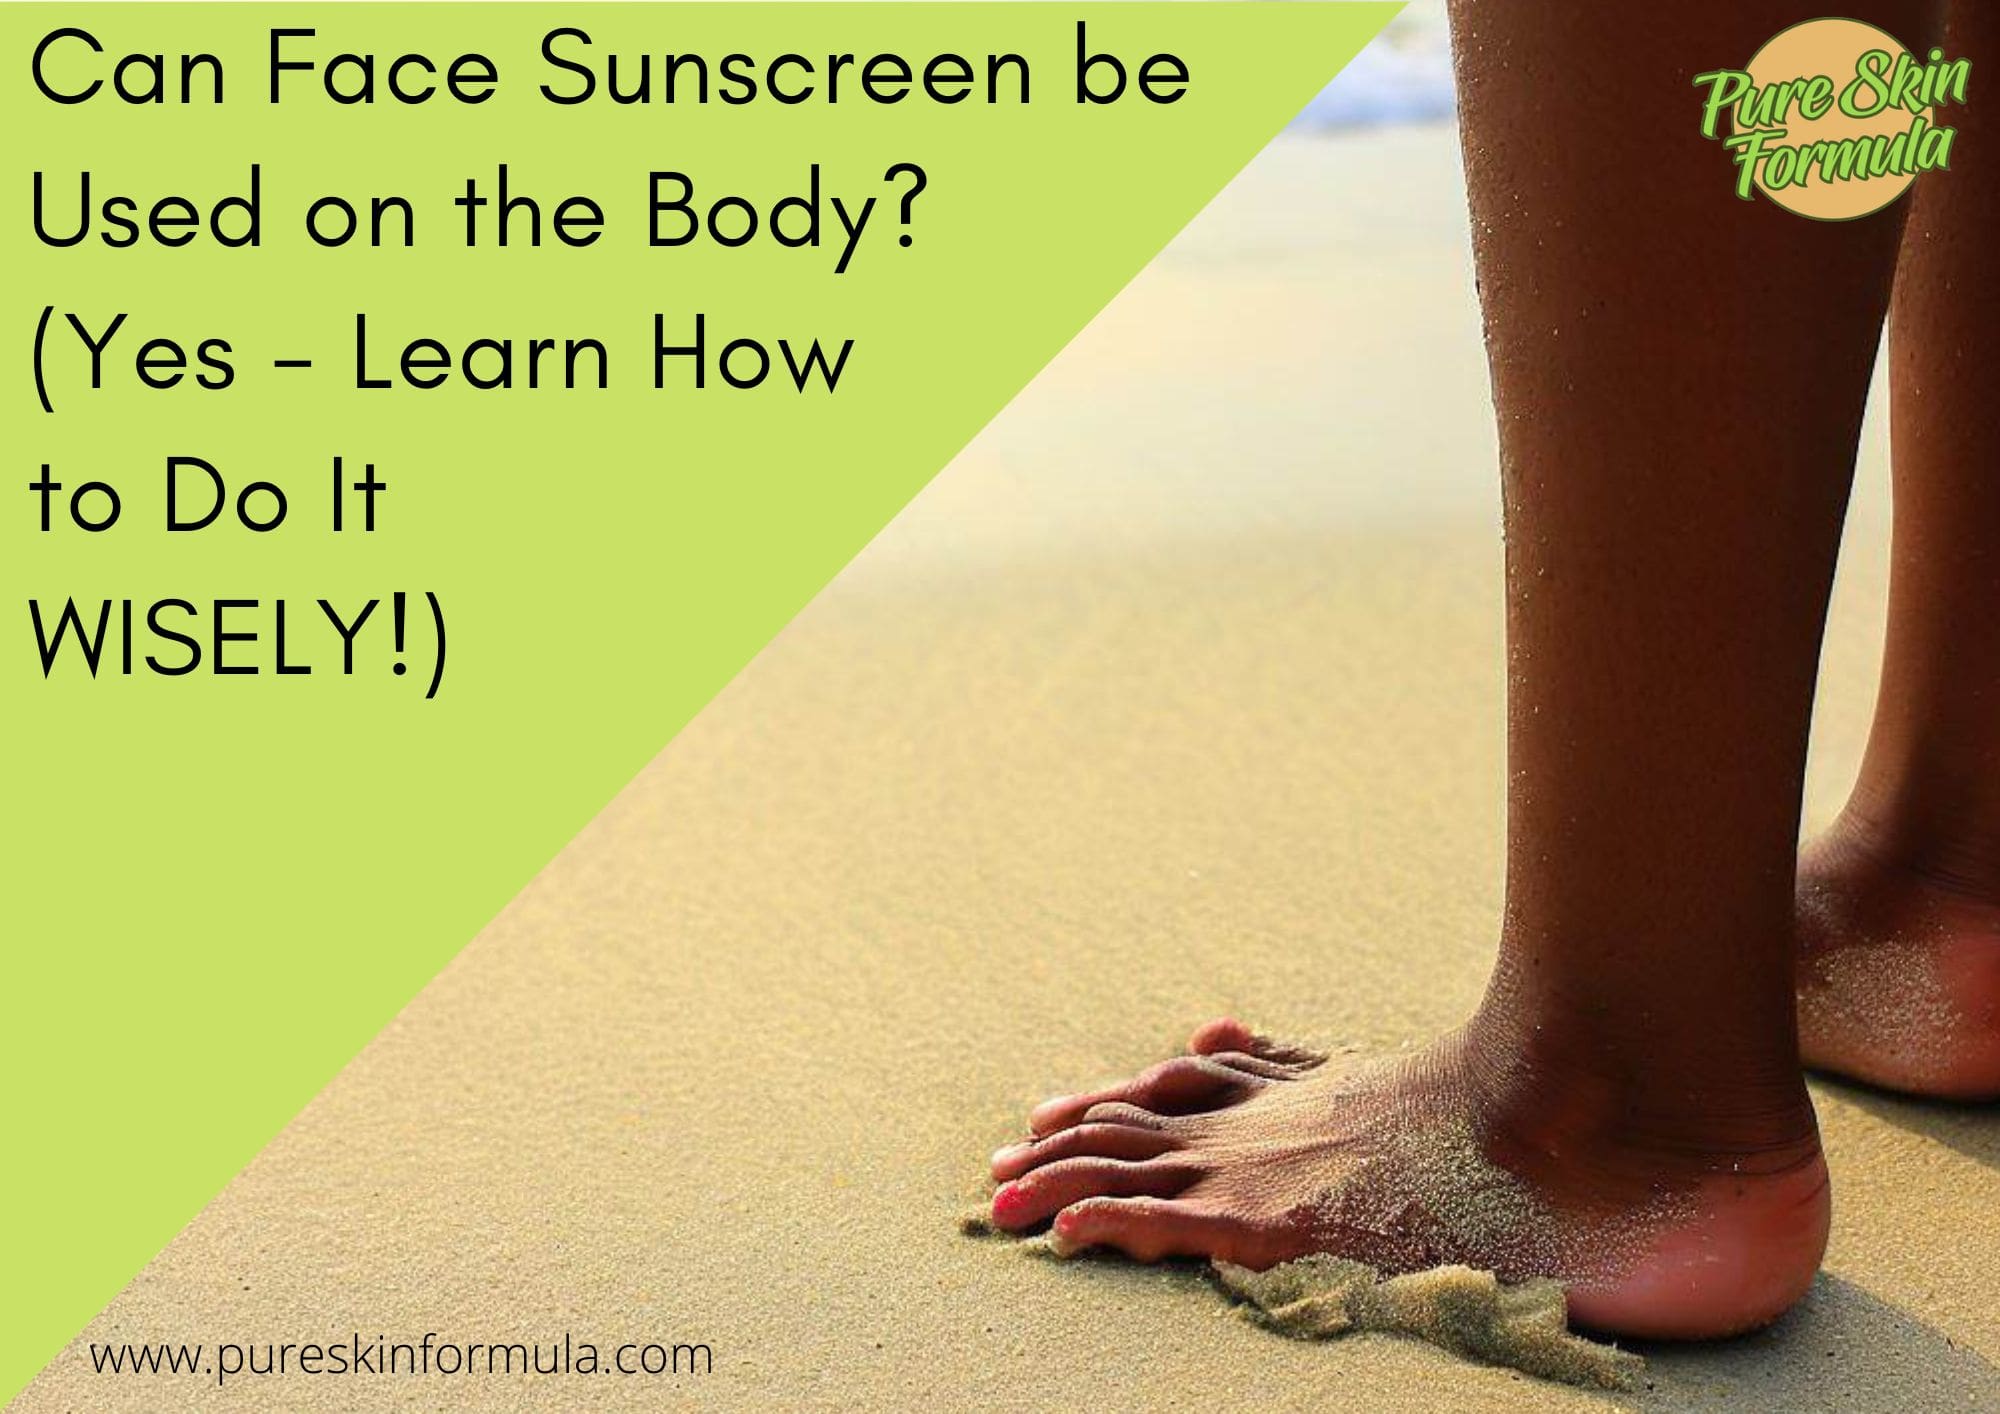 Can Face Sunscreen be Used on the Body_featured image